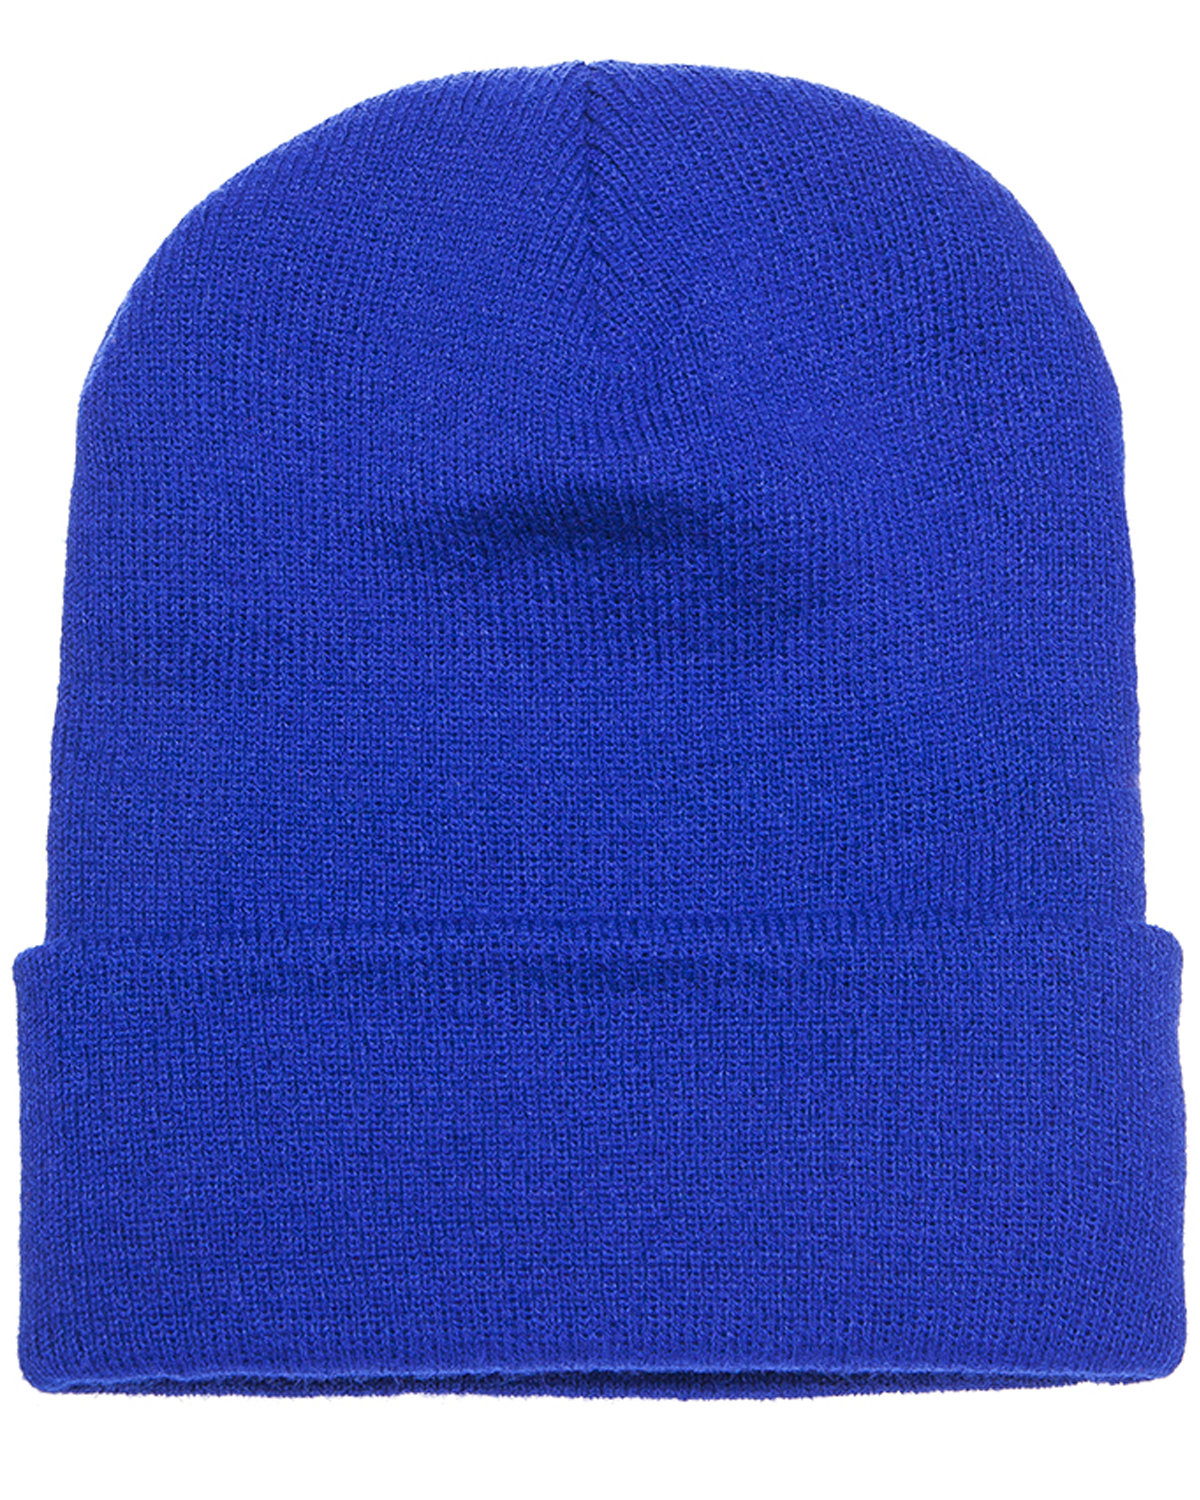 Cuffed Yupoong Adult alphabroder | Knit Beanie